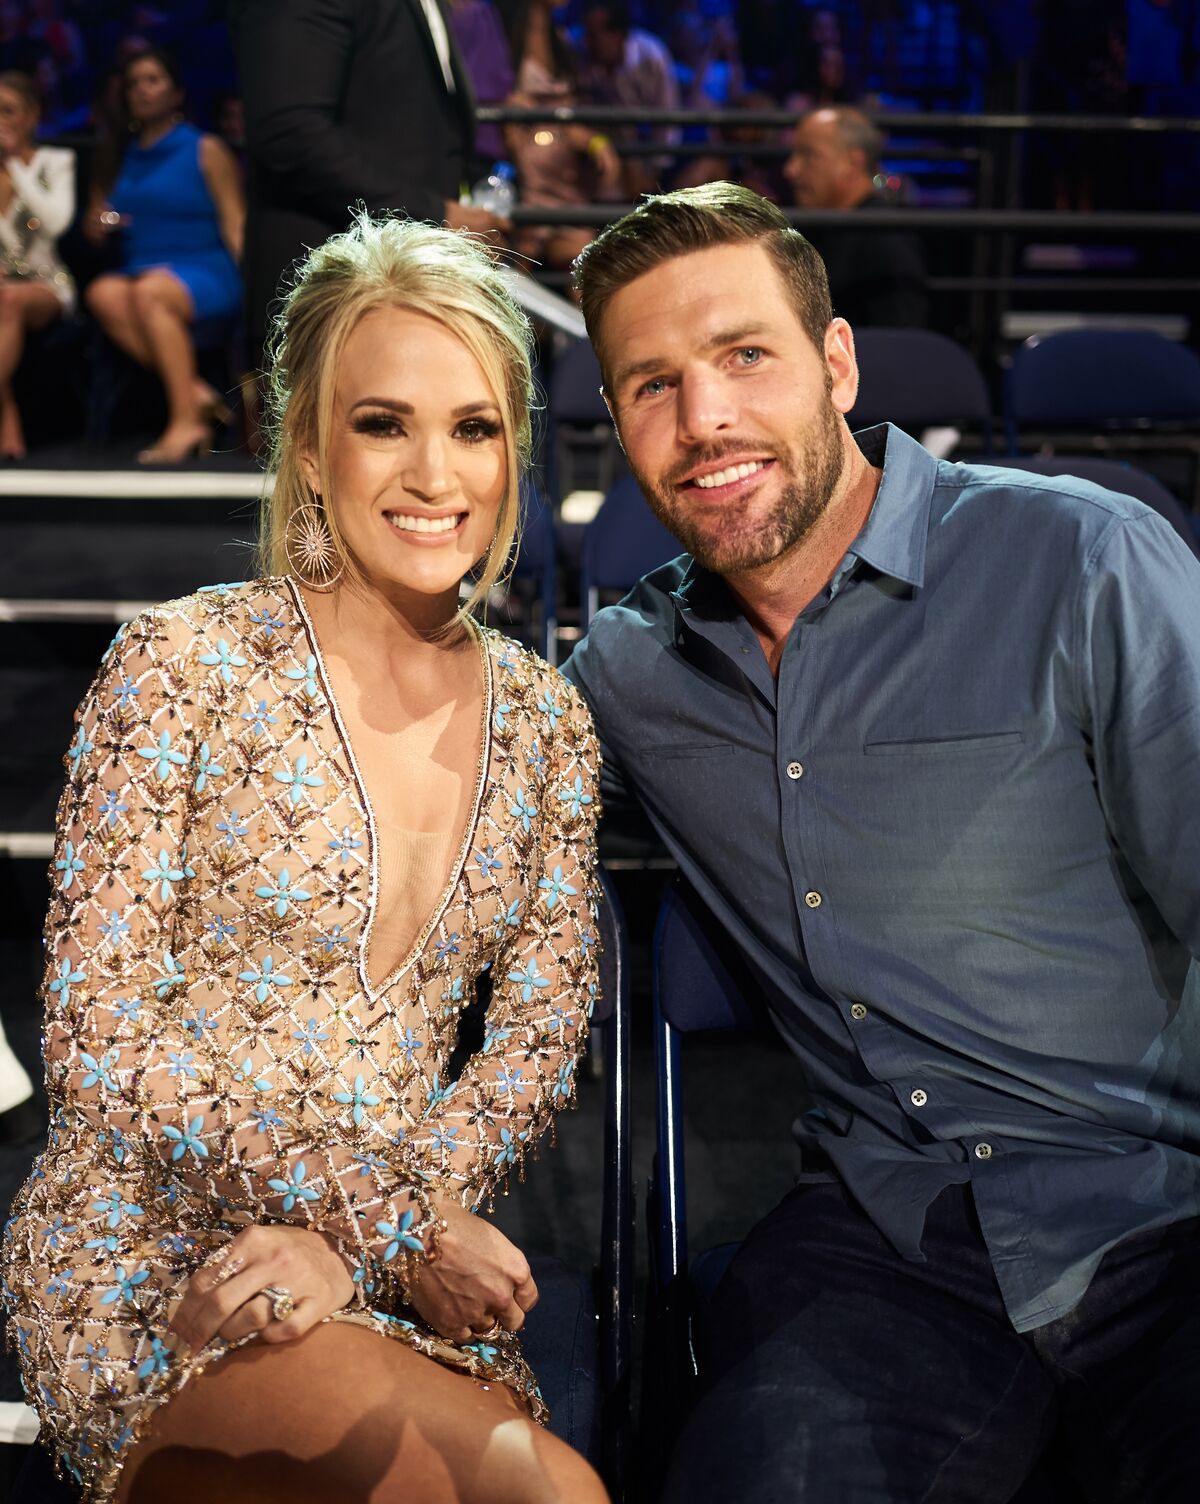 Carrie Underwood and Mike Fisher at the CMT Music Awards on June 05, 2019, in Nashville, Tennessee | Photo: John Shearer/Getty Images